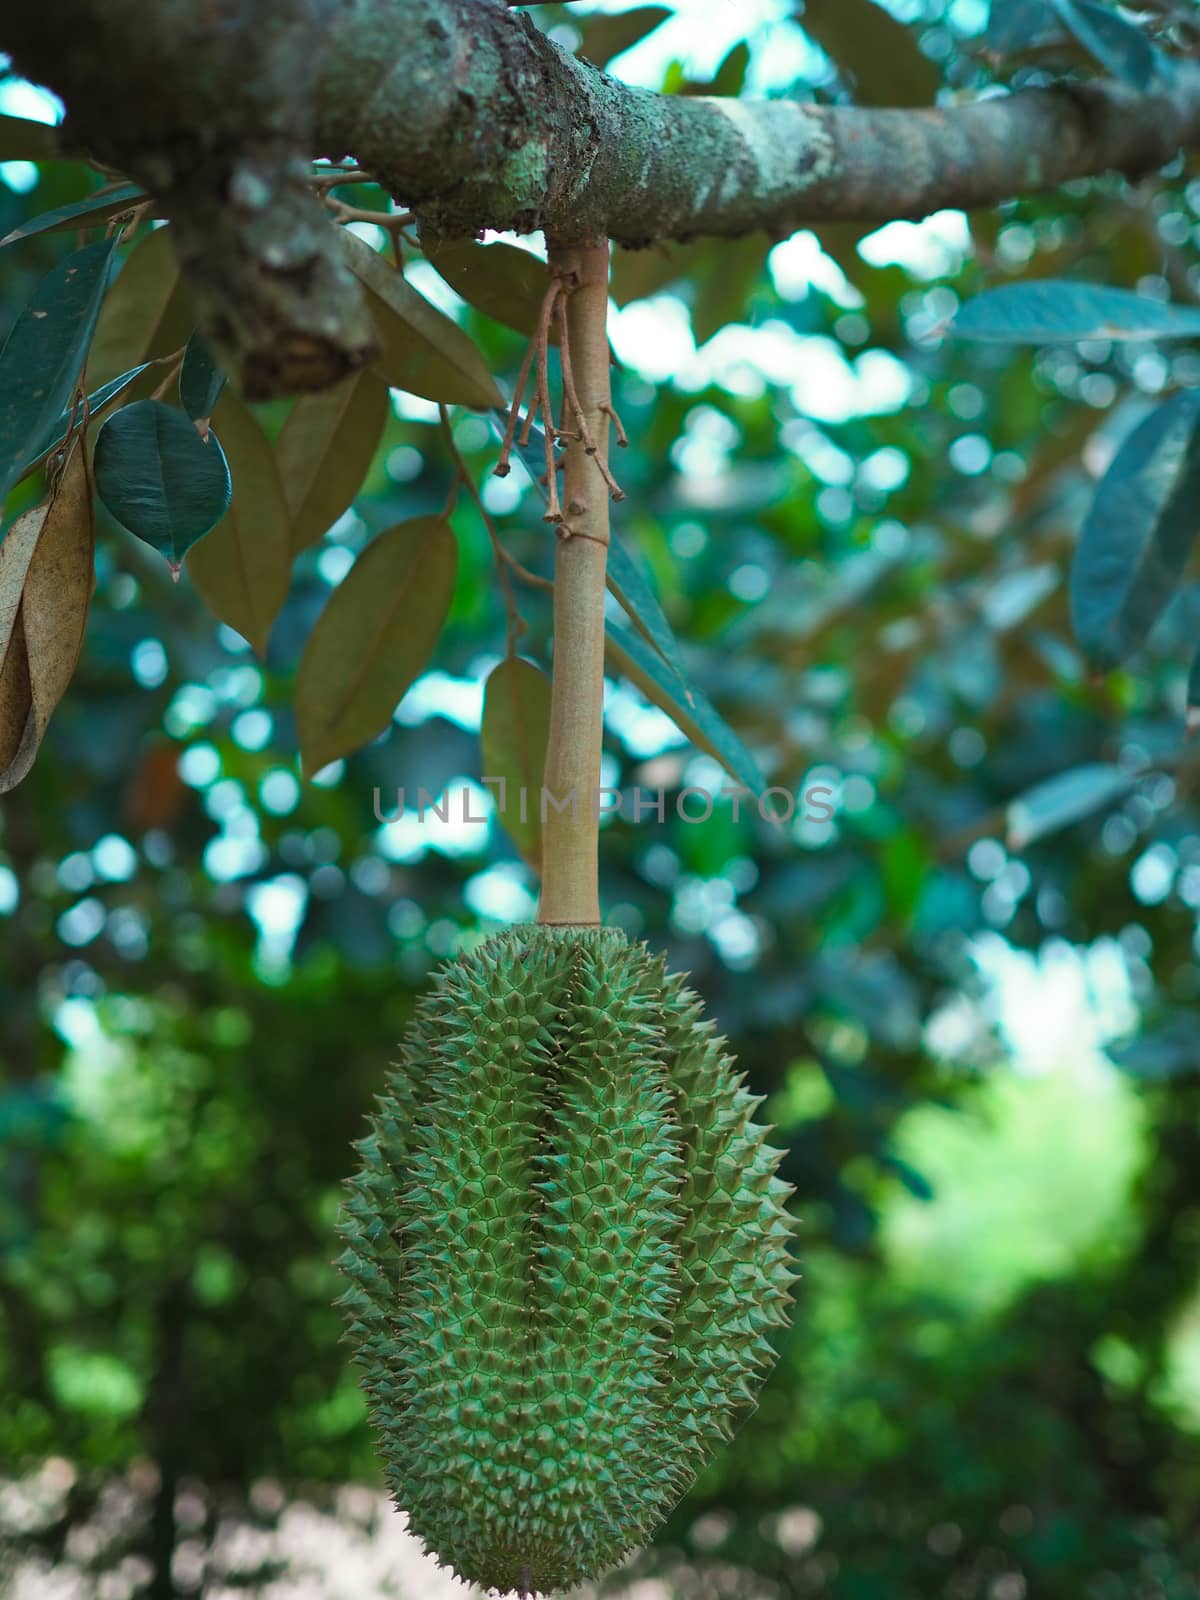 Durian is getting ripe, appetizing.